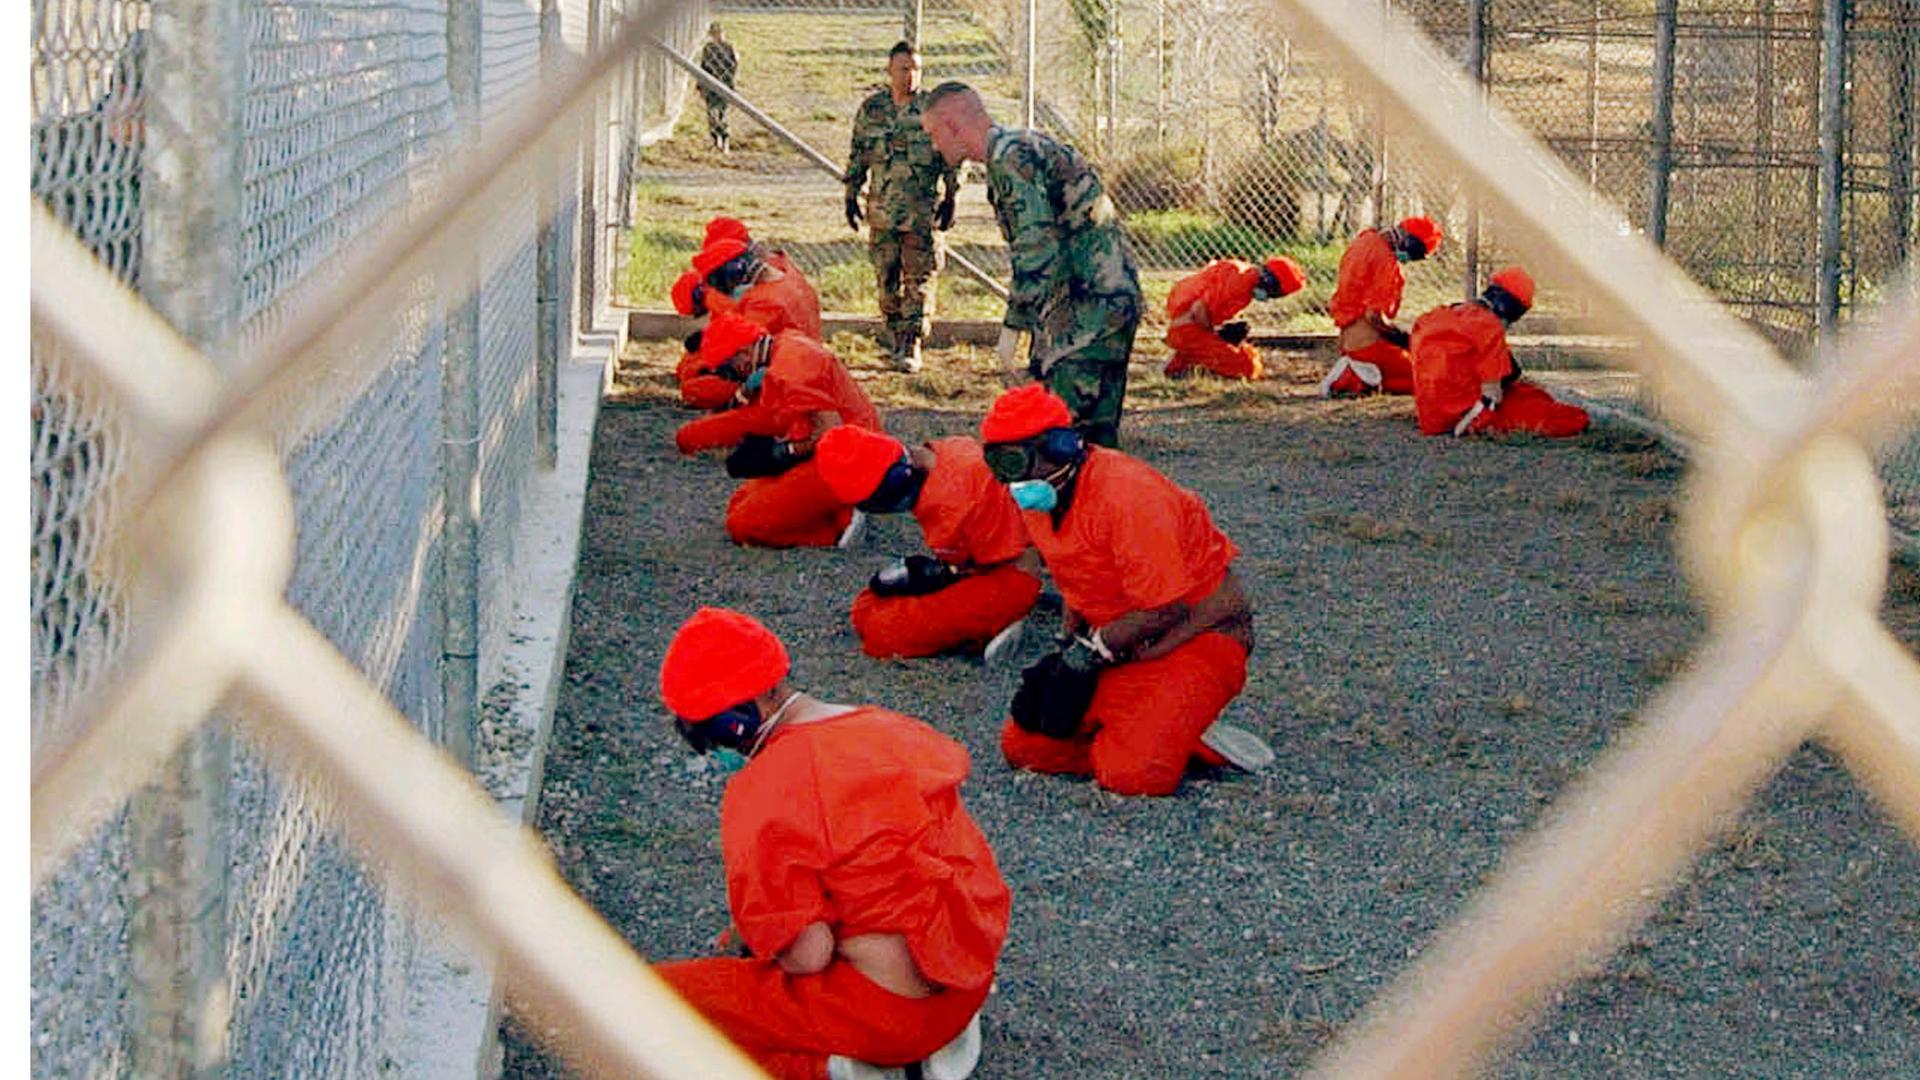 Detainees in orange jumpsuits sit in a holding area watched by military police at Guantanamo Bay's Camp X-Ray in 2002.